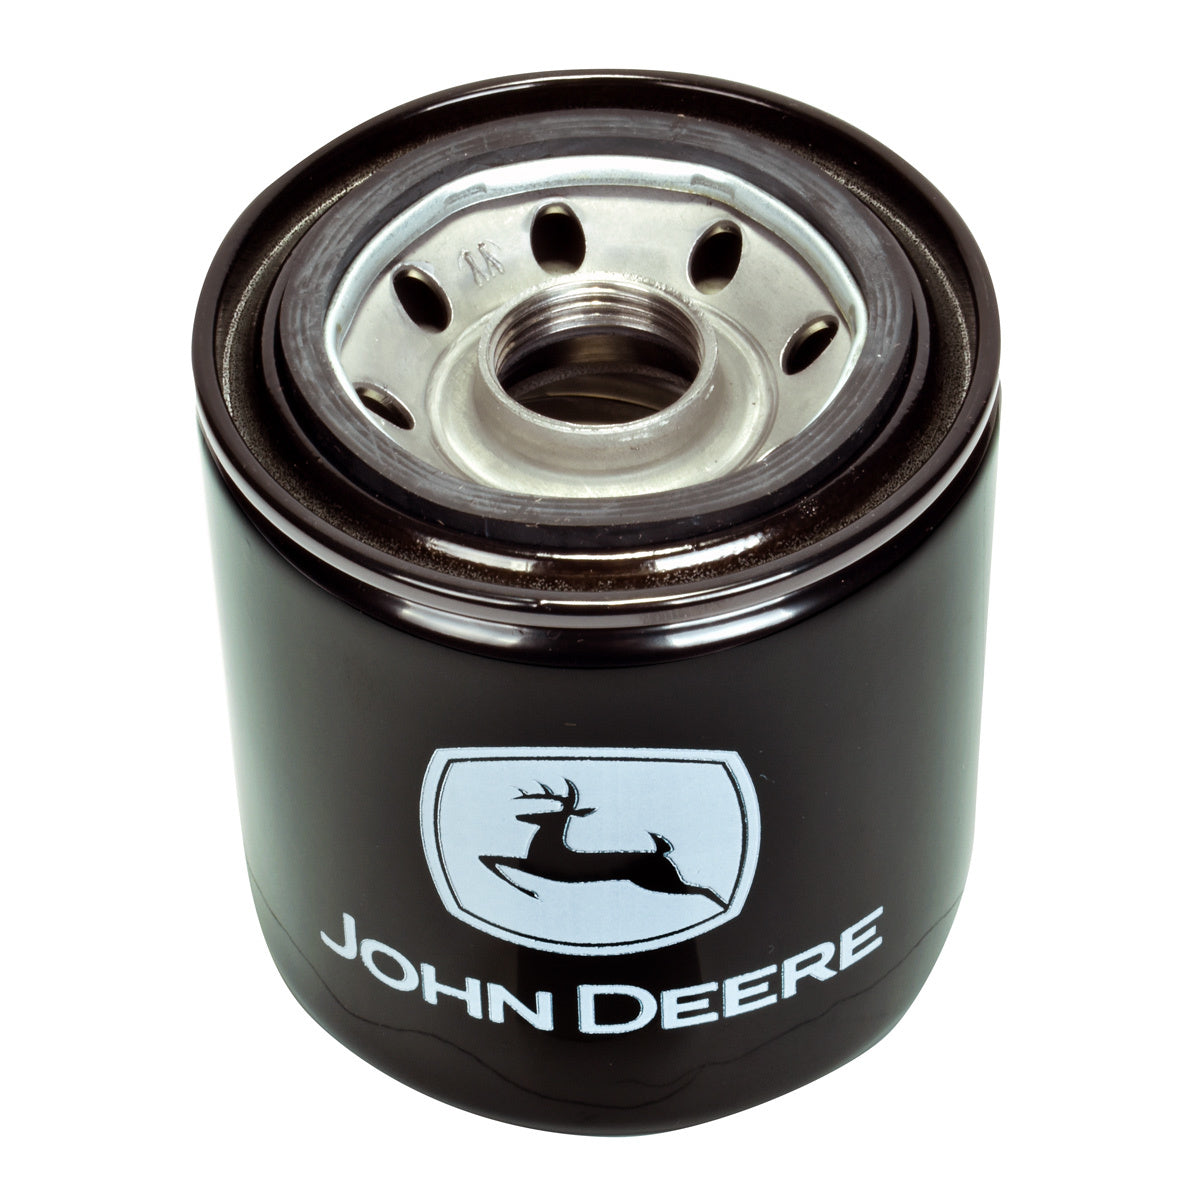 John Deere Hydraulic Filter for 2000 Series Compact Utility Tractor